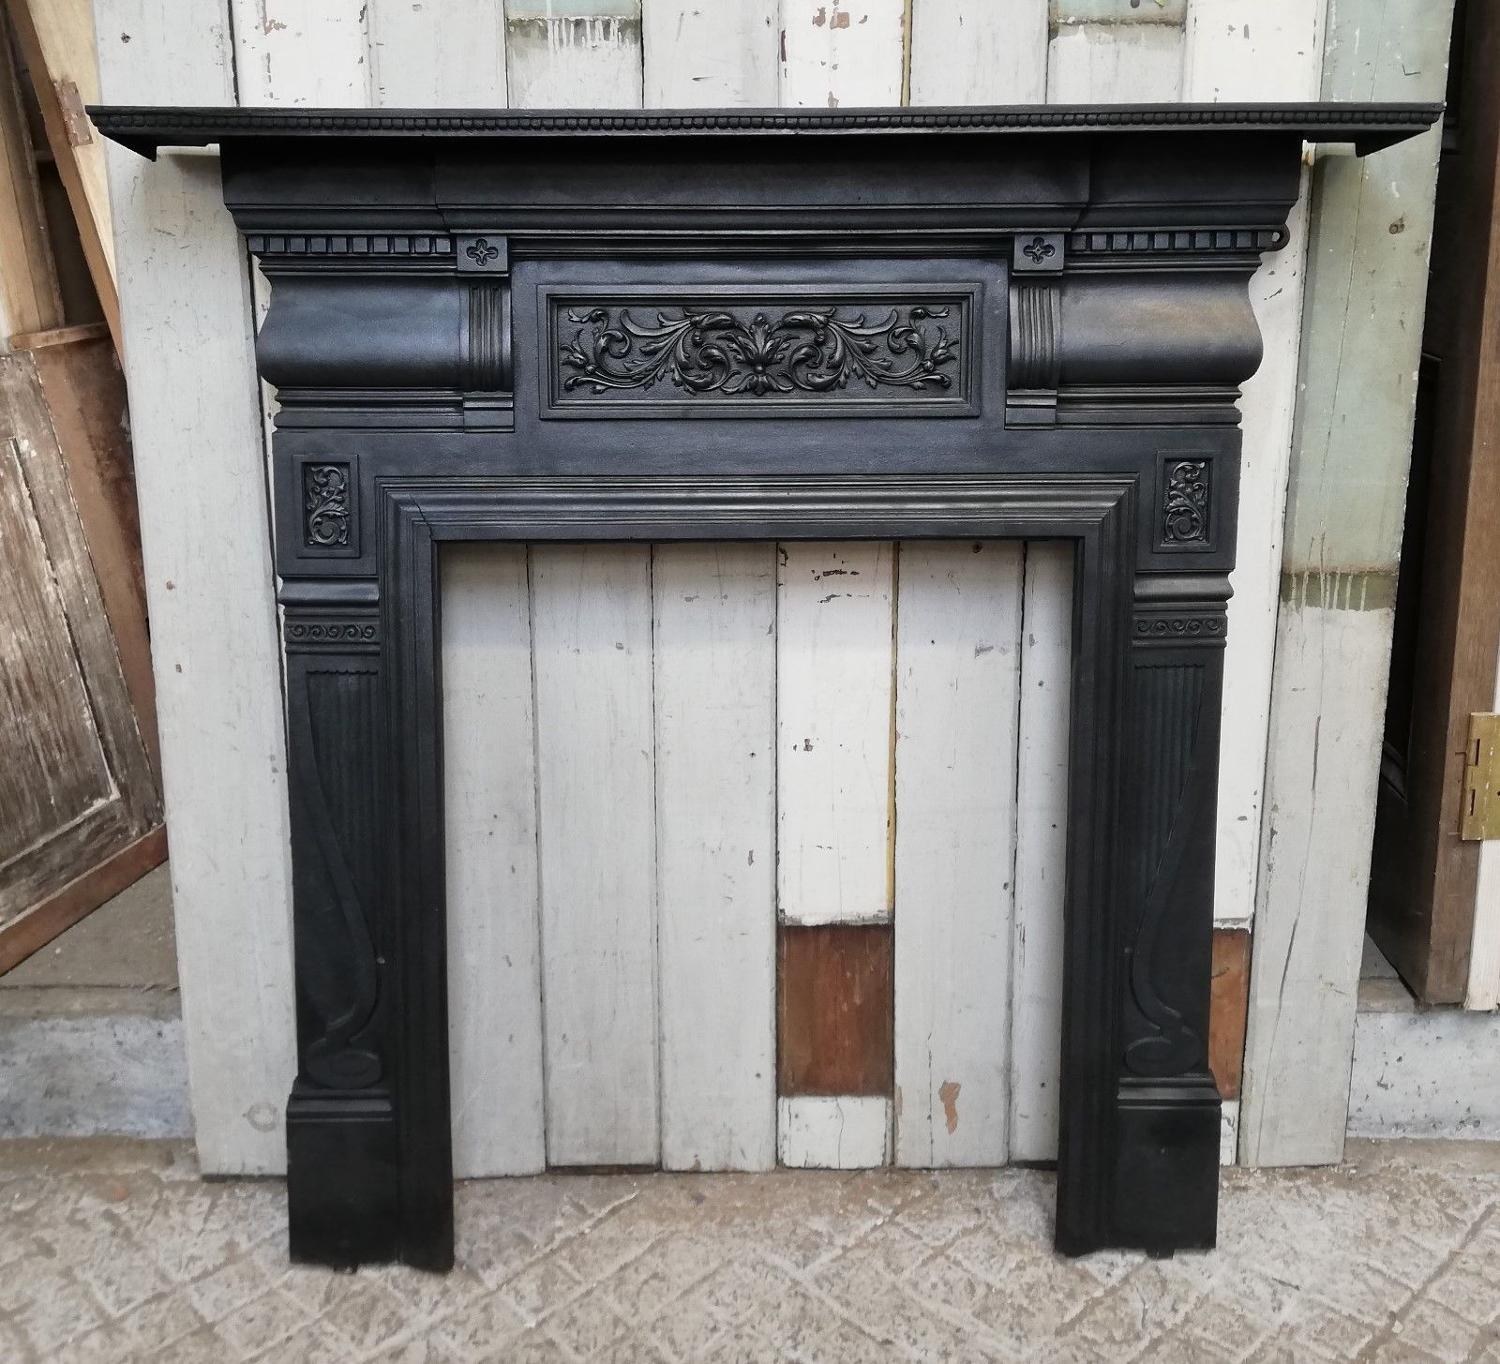 FS0047 A VICTORIAN CAST IRON FIRE SURROUND FOR WOOD BURNER OR BASKET